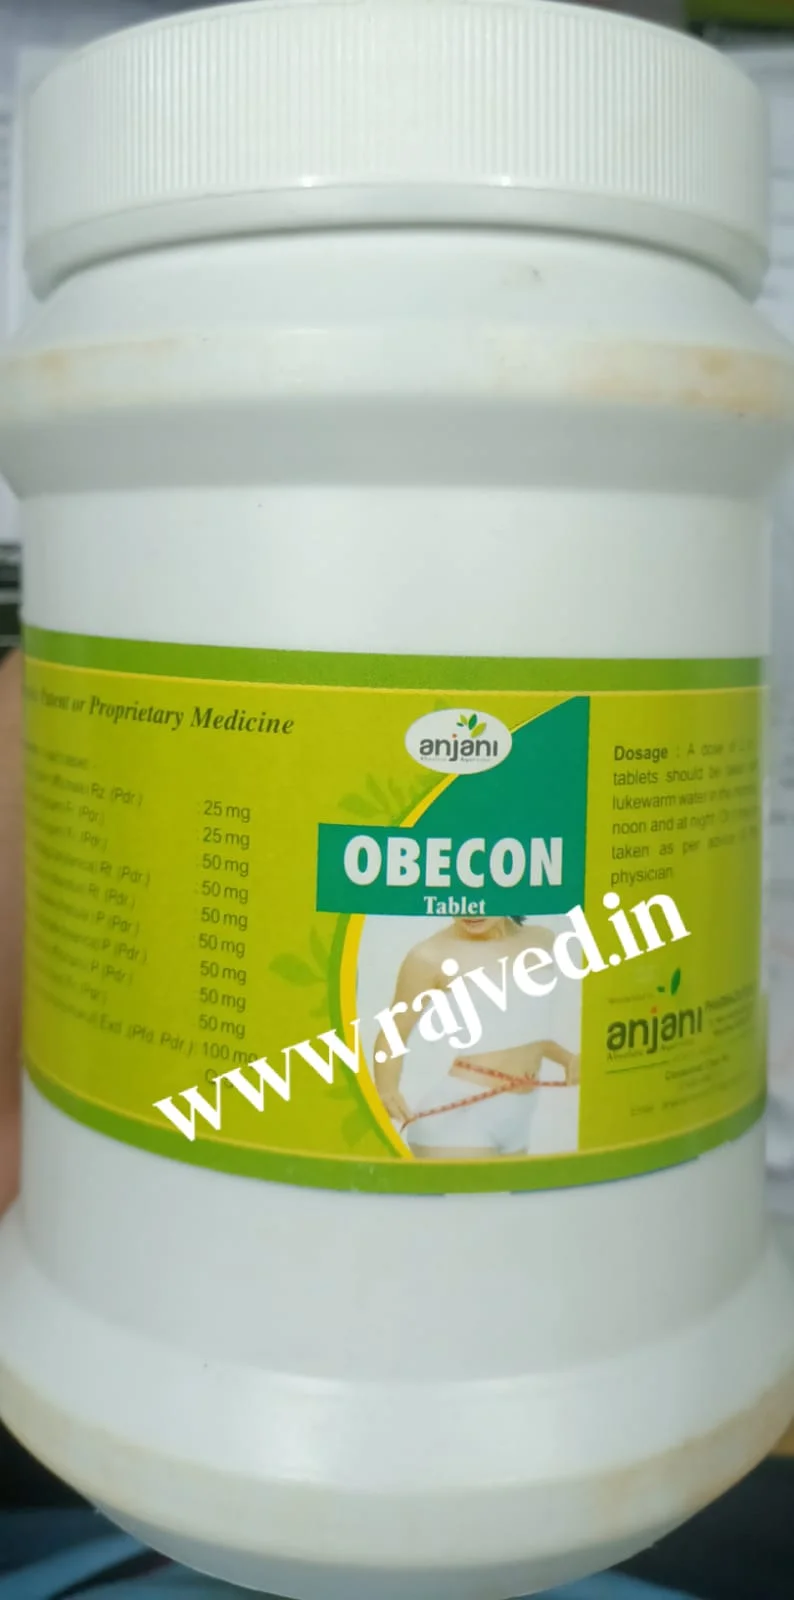 obecon tablet 5000 tab upto 20% off free shipping Anjani Pharmaceuticals